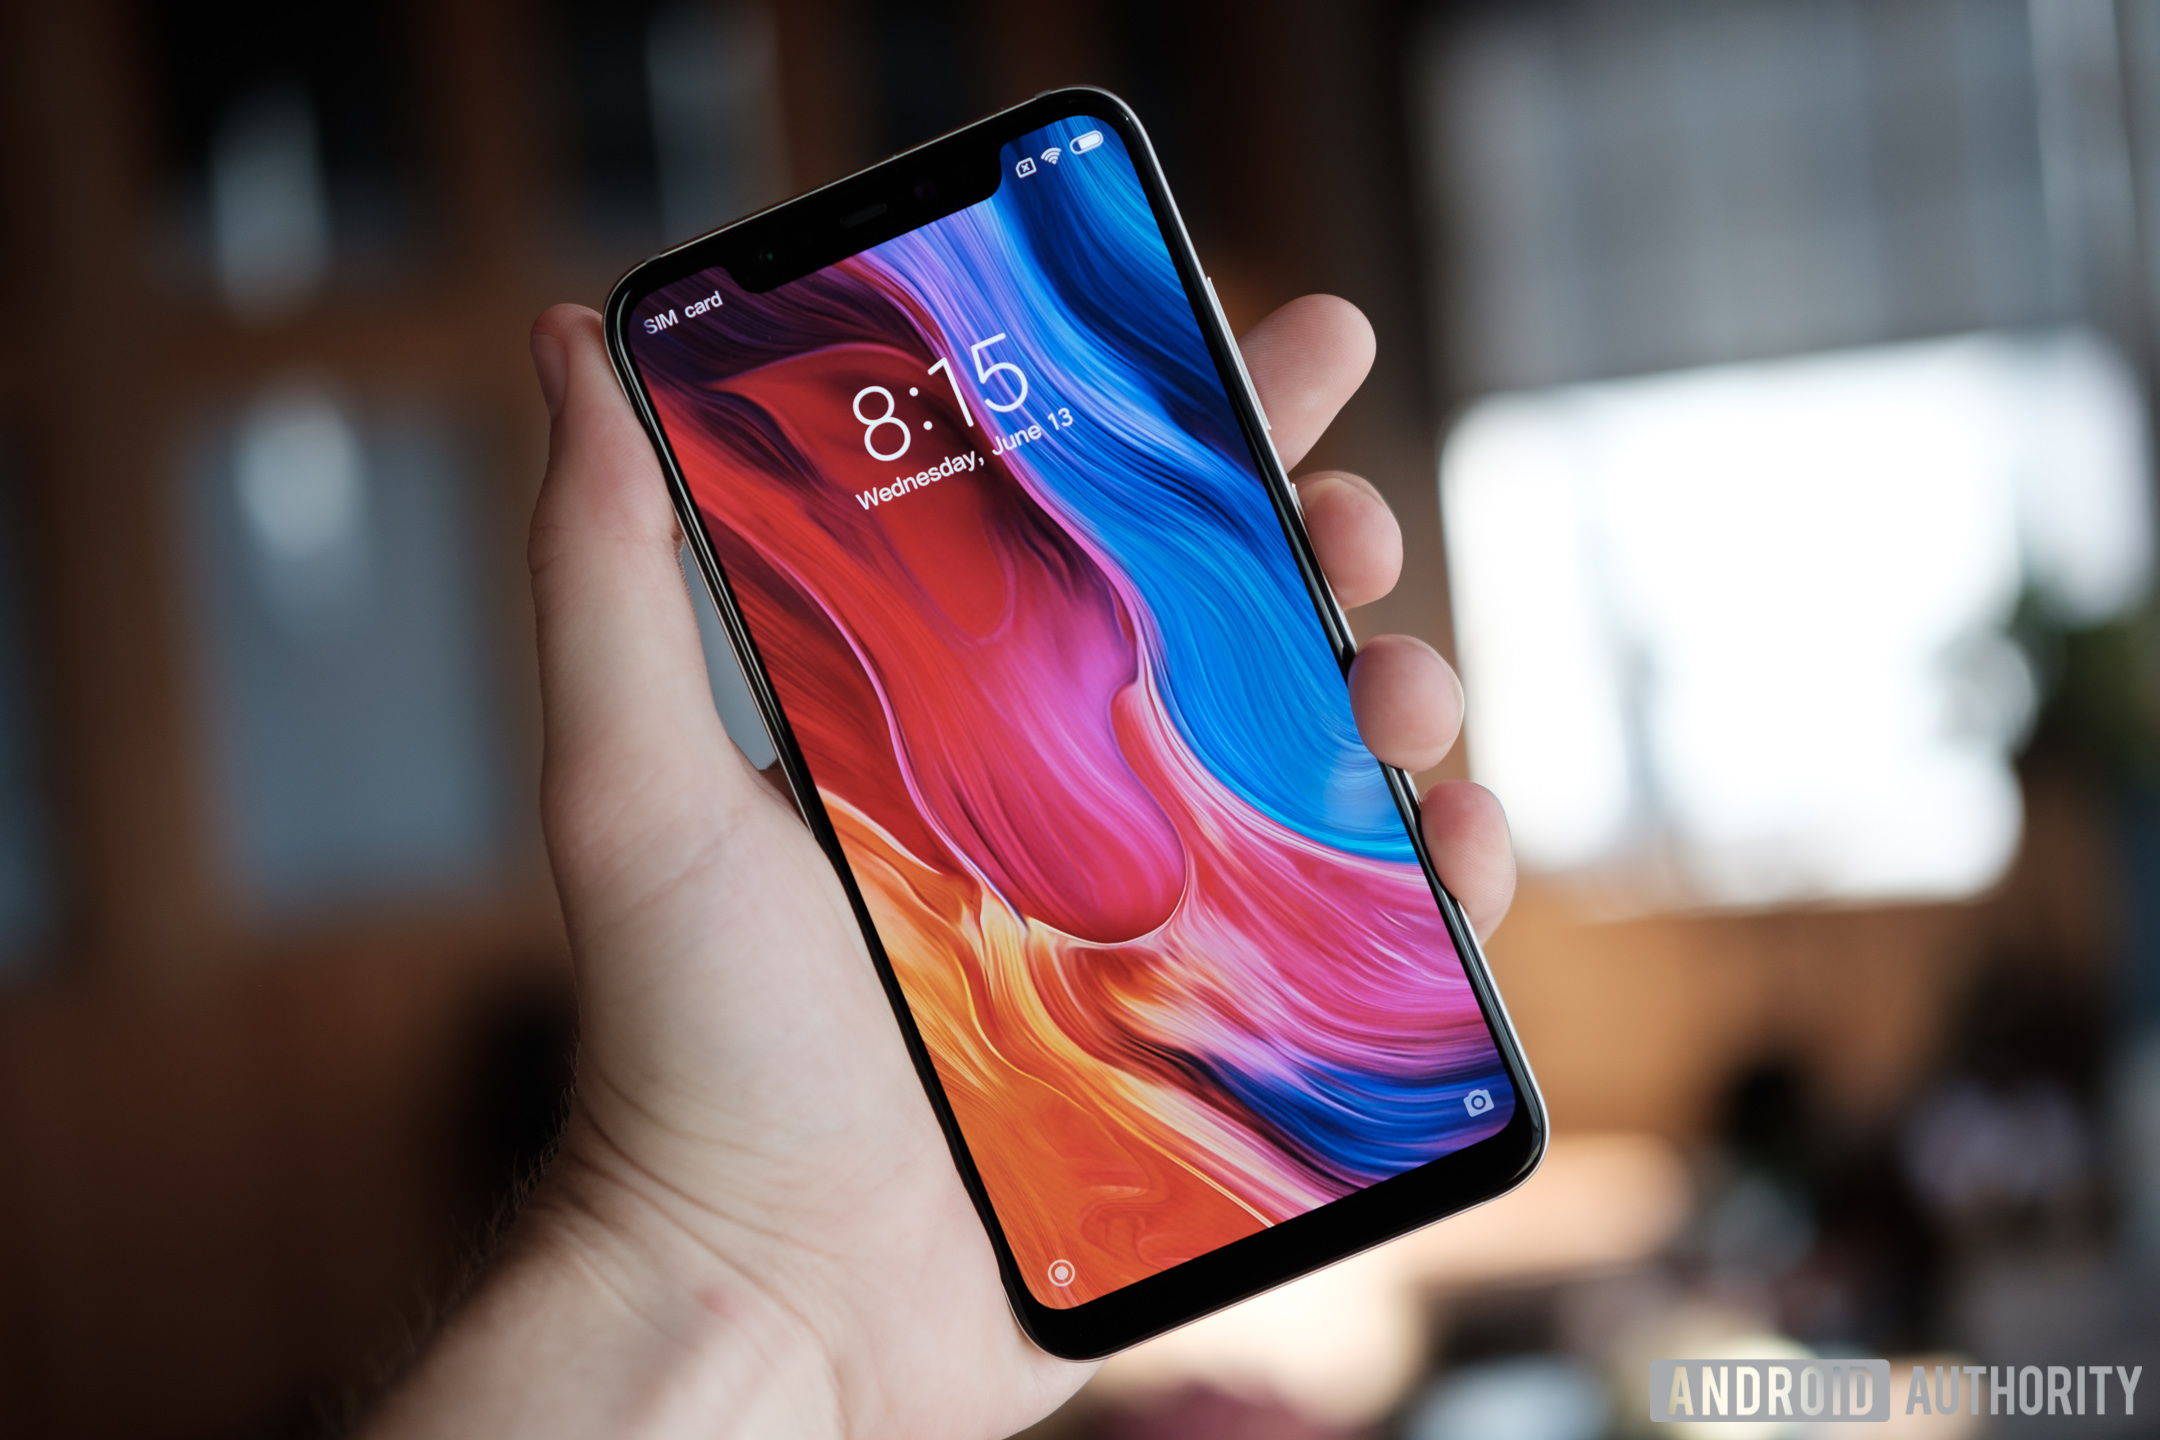 The front of the Xiaomi Mi 8.